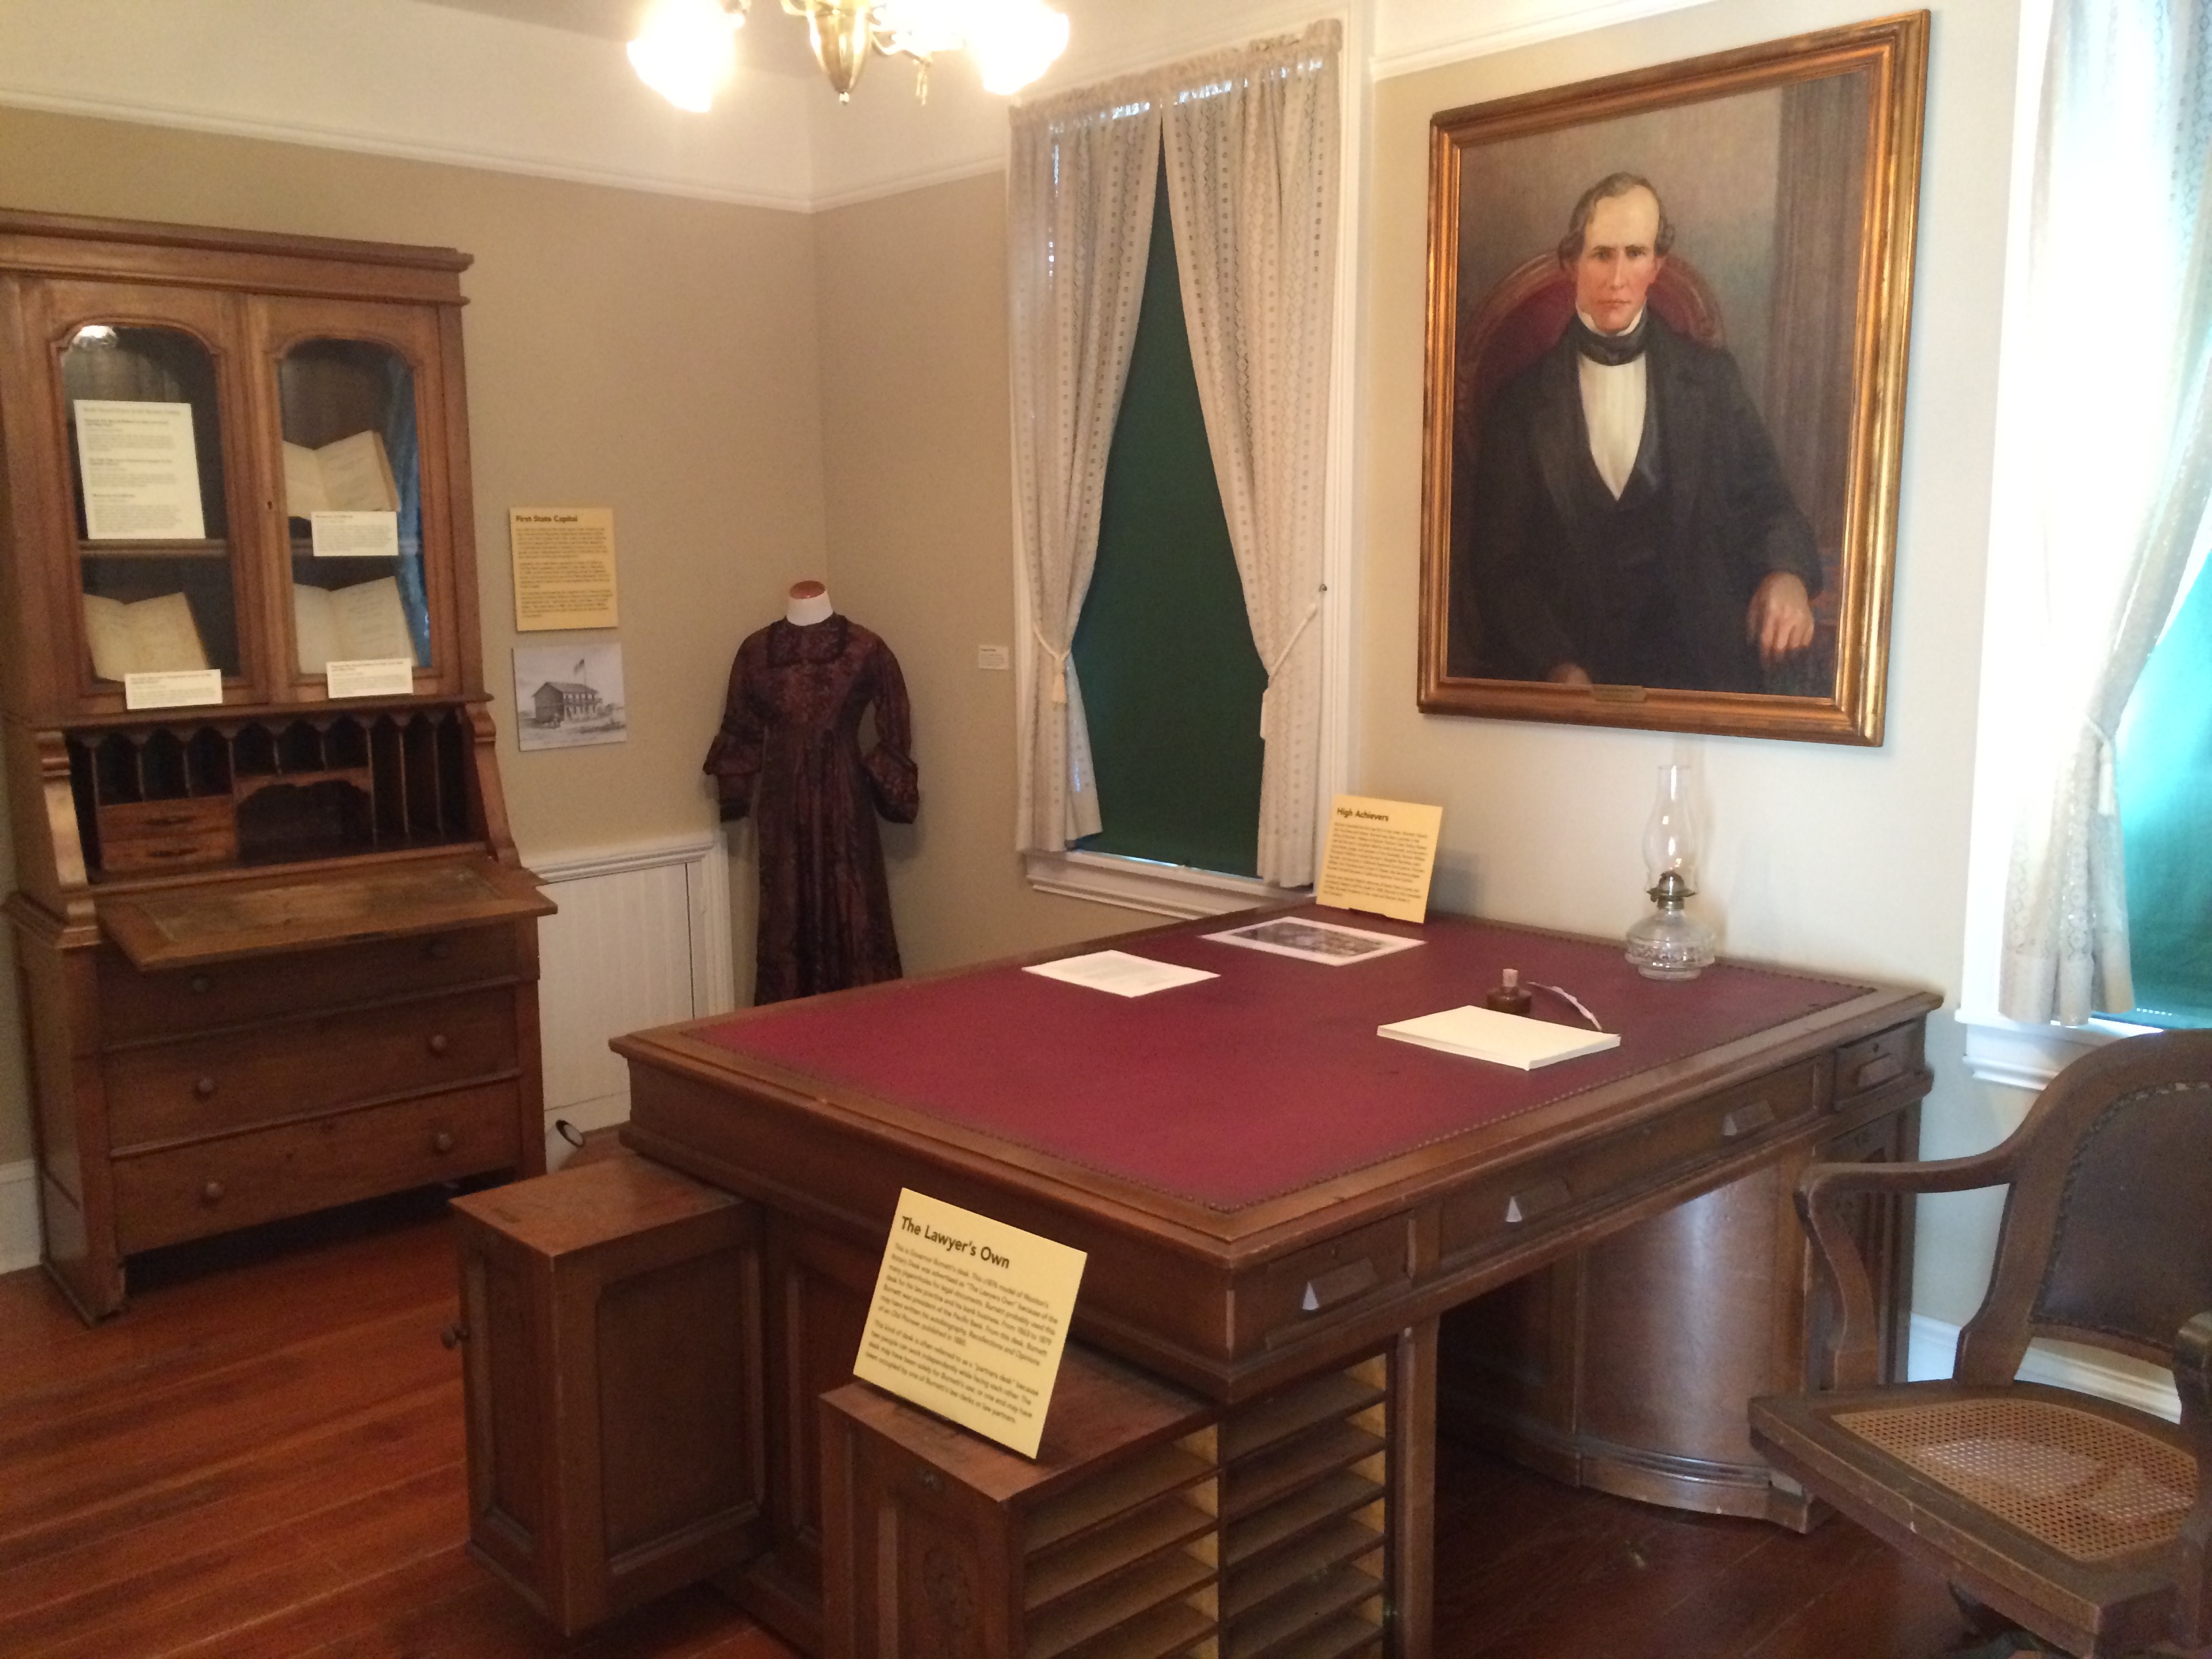 Burnett's desk: Finally a lead (Courtesy of Judge Paul Bernal, museum chair and official historian of the City of San Jose)